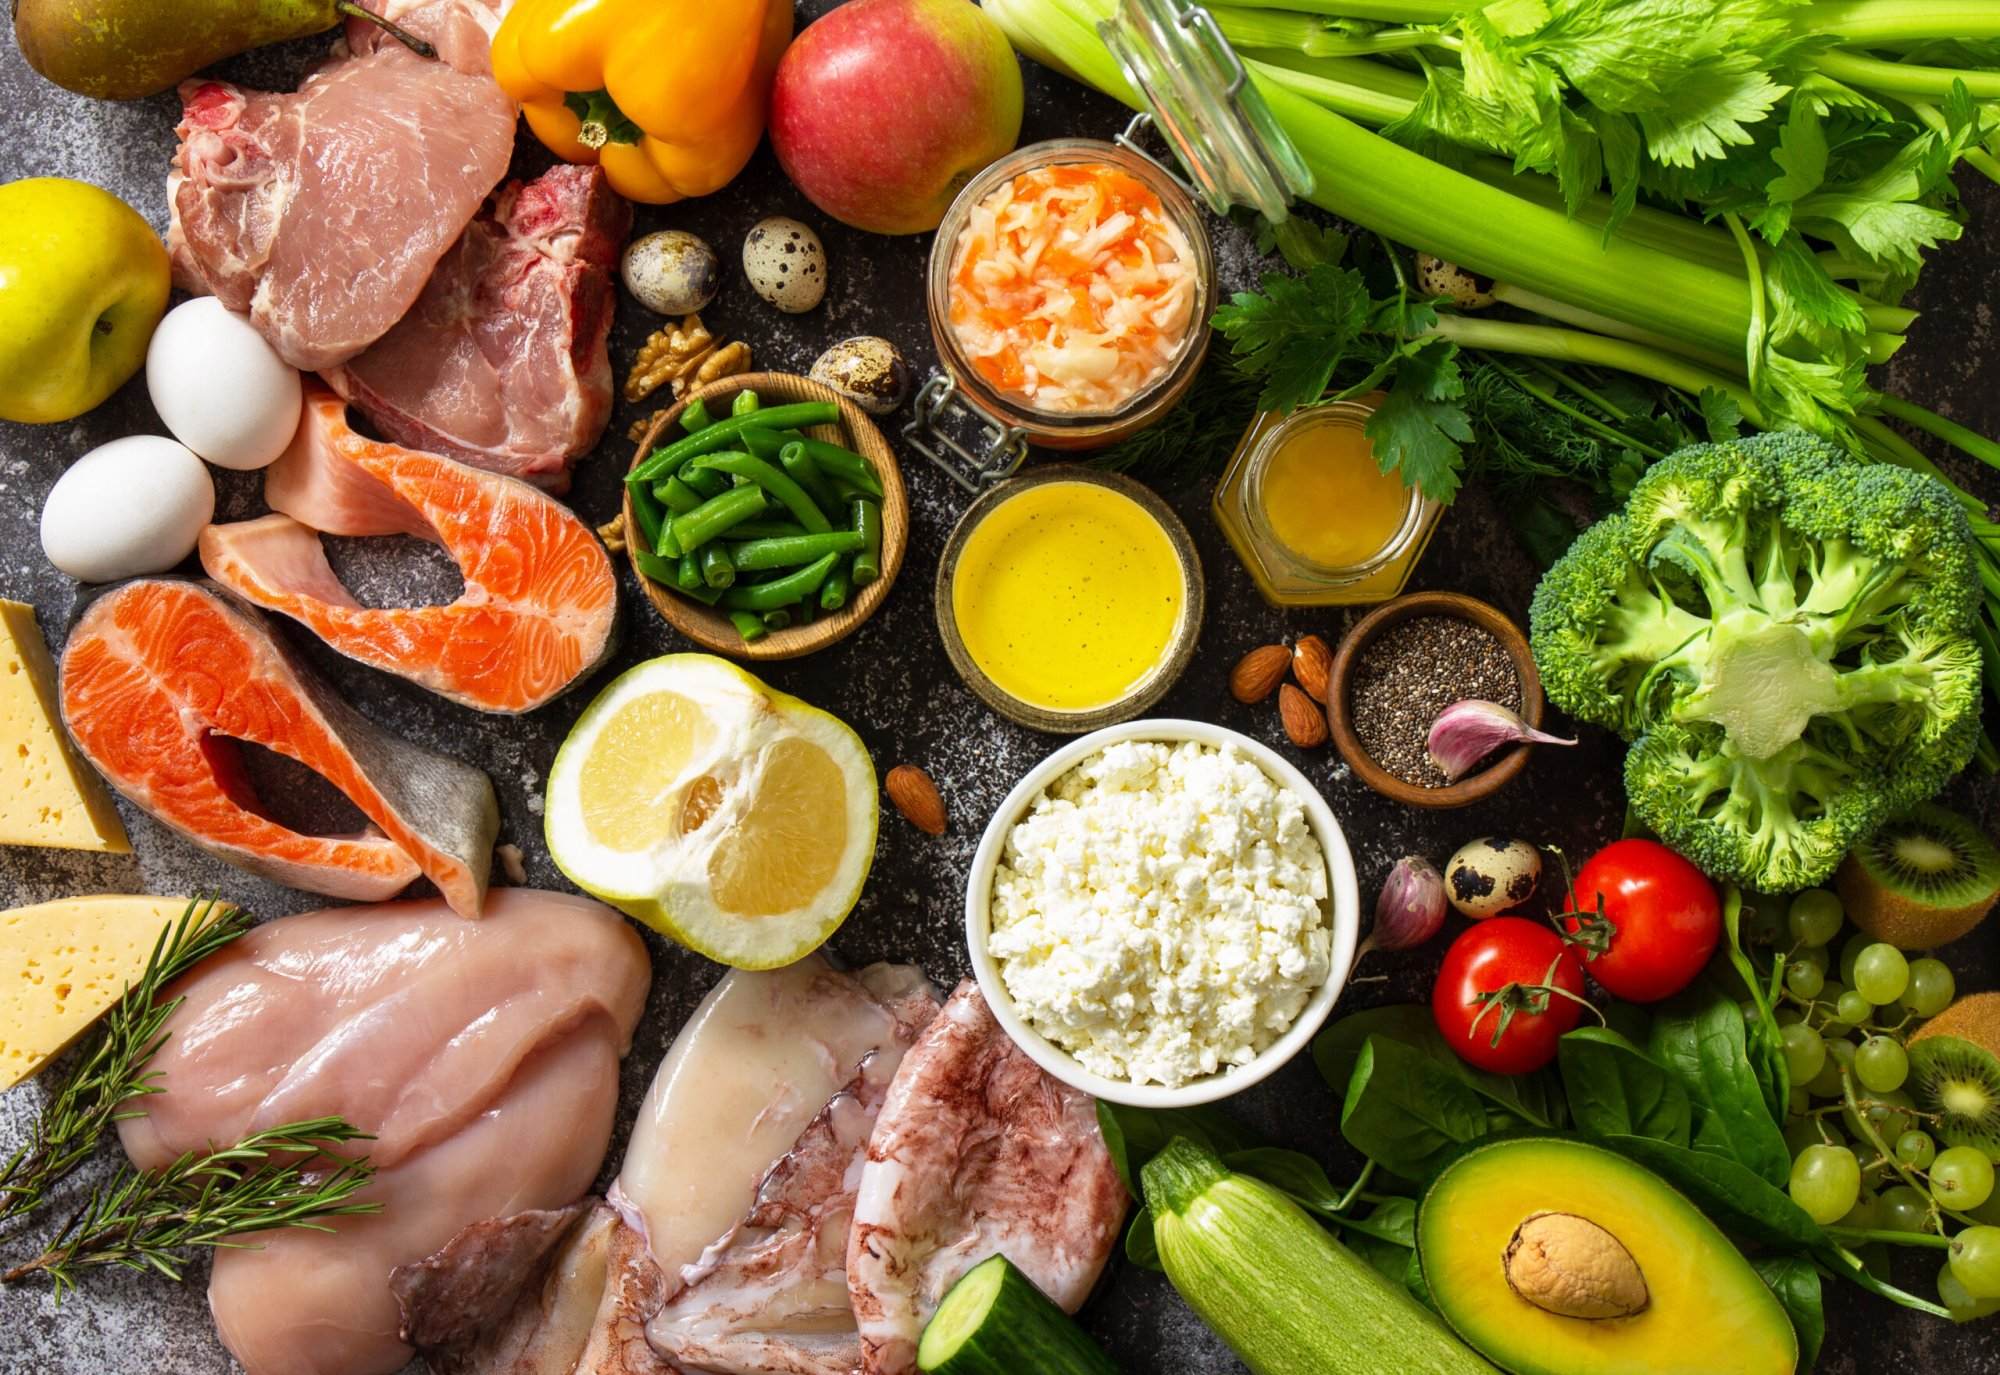 A variety of fuel-rich foods including meat, vegetables, and fruit to sustain long runs.